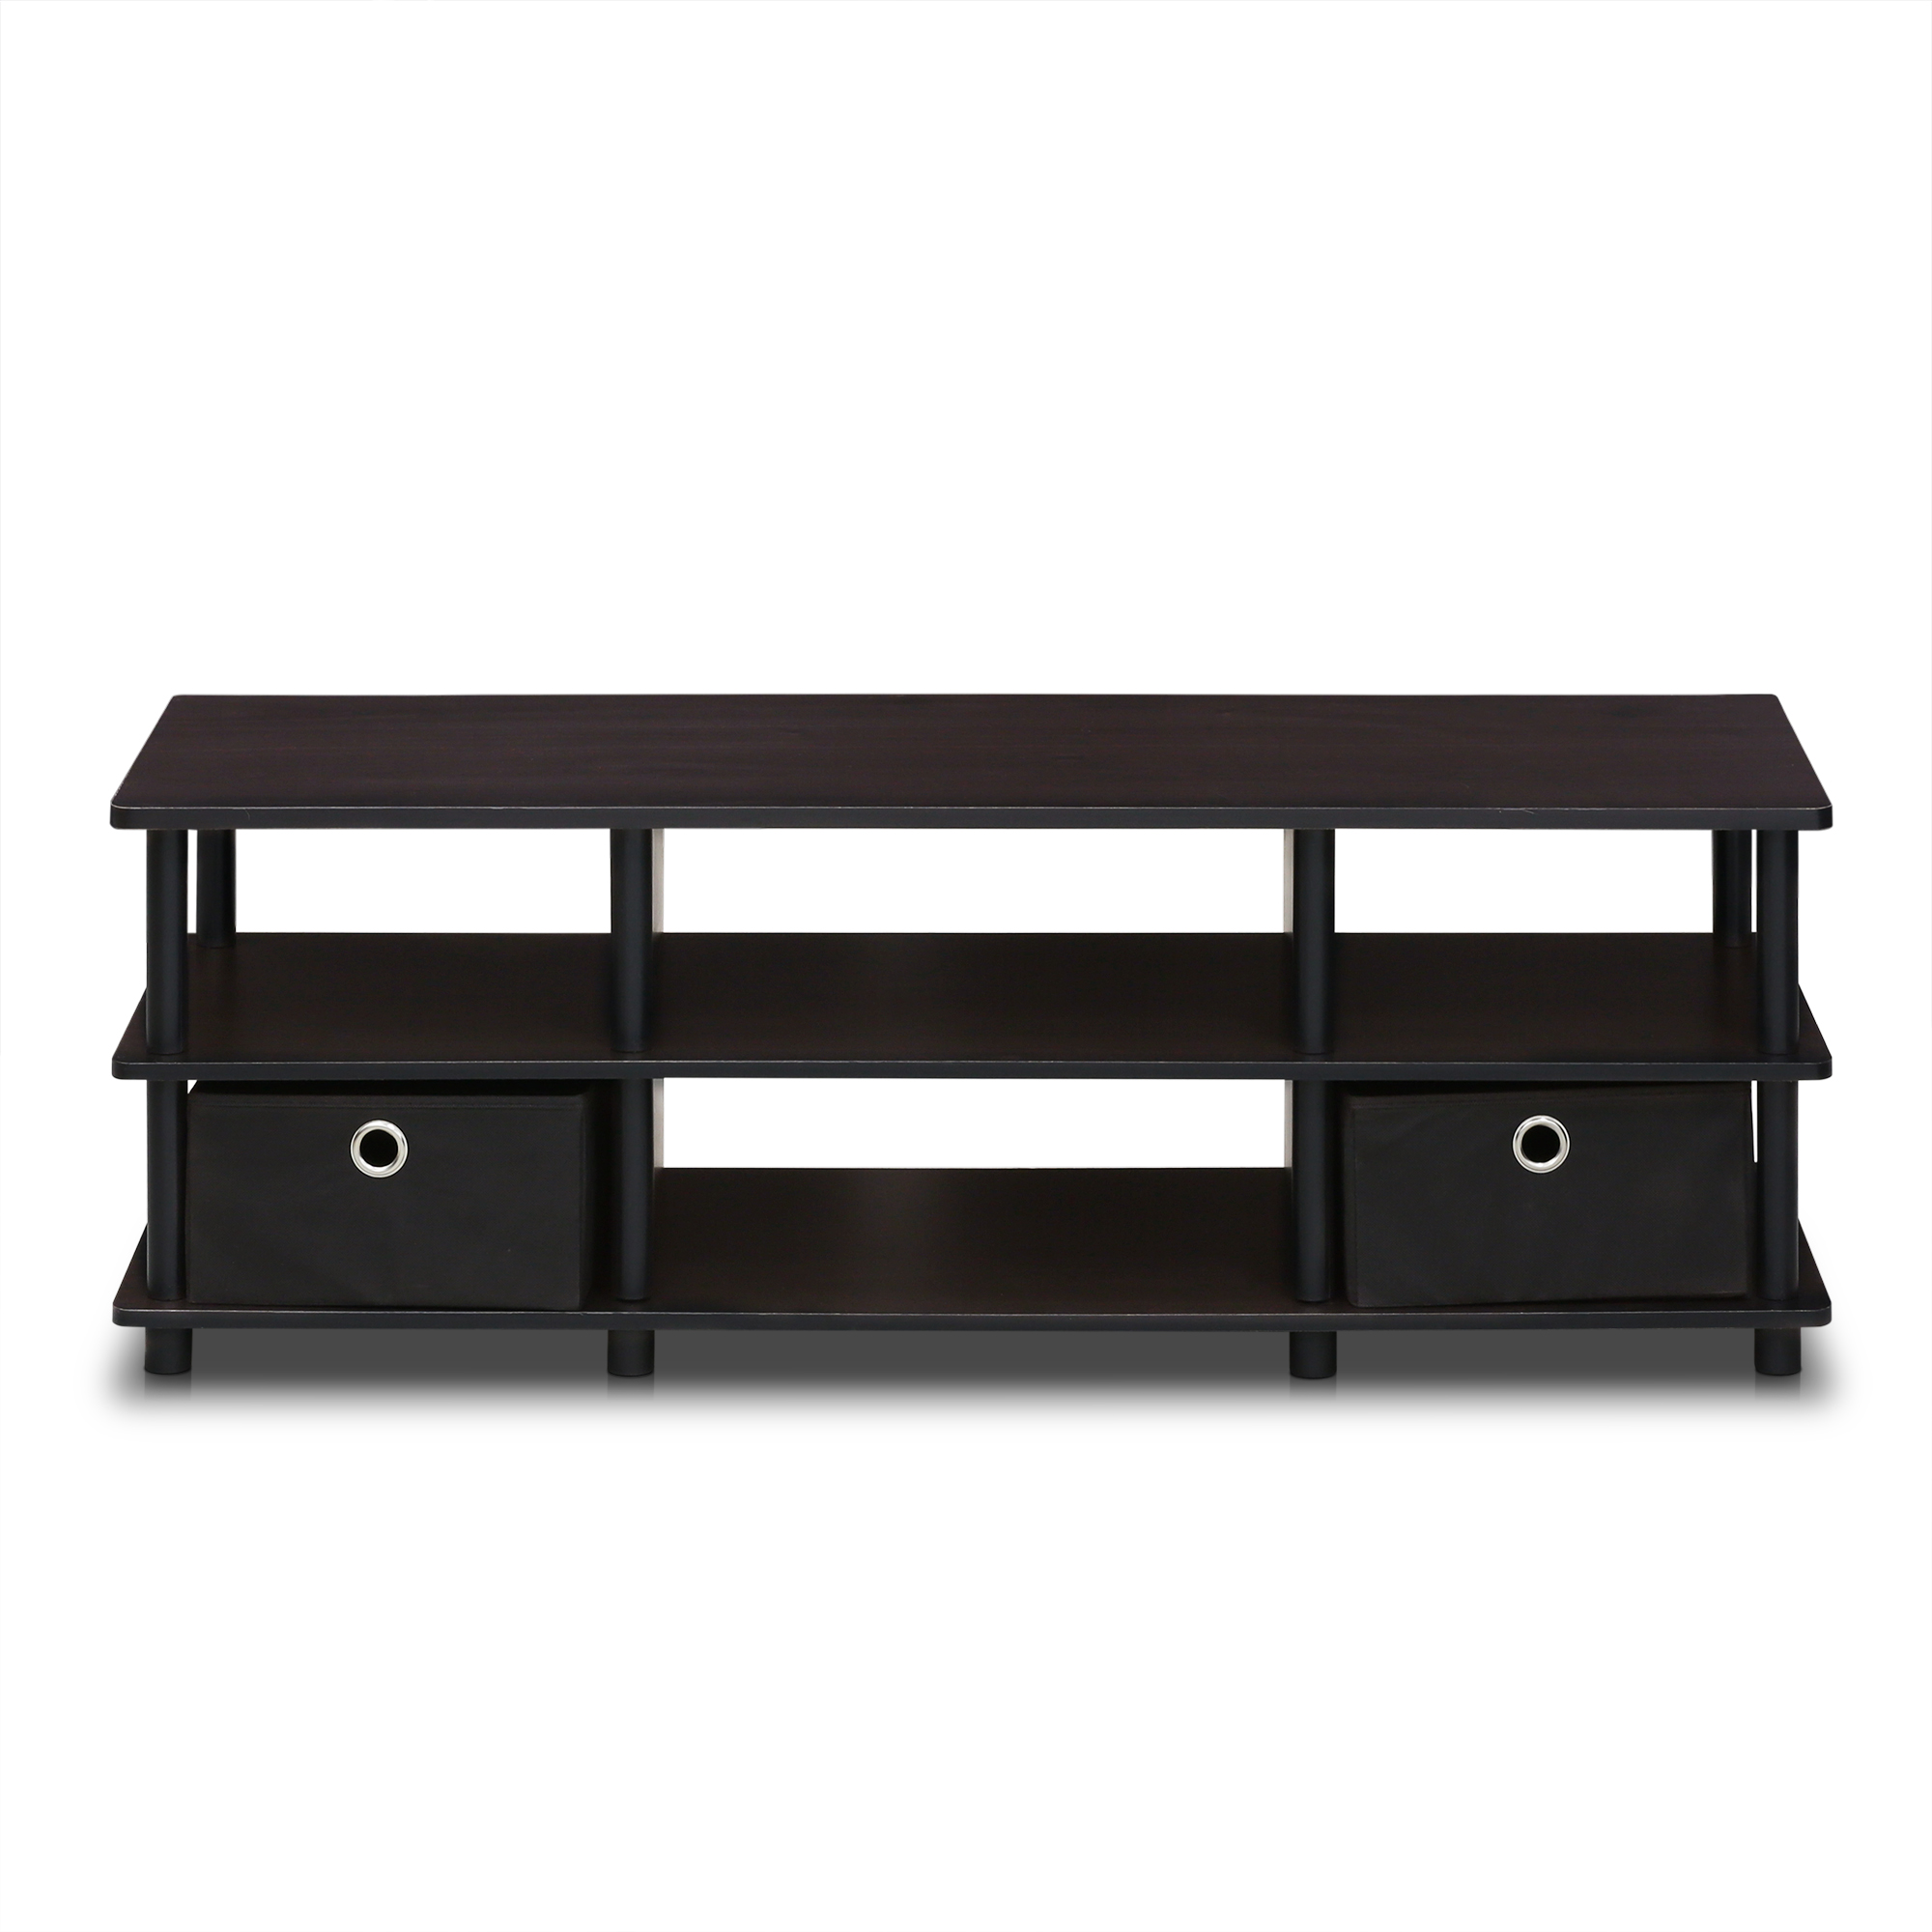 FURINNO 43" Blackwood TV Stand Cabinet Console Unit Furniture Table w/ Shelves